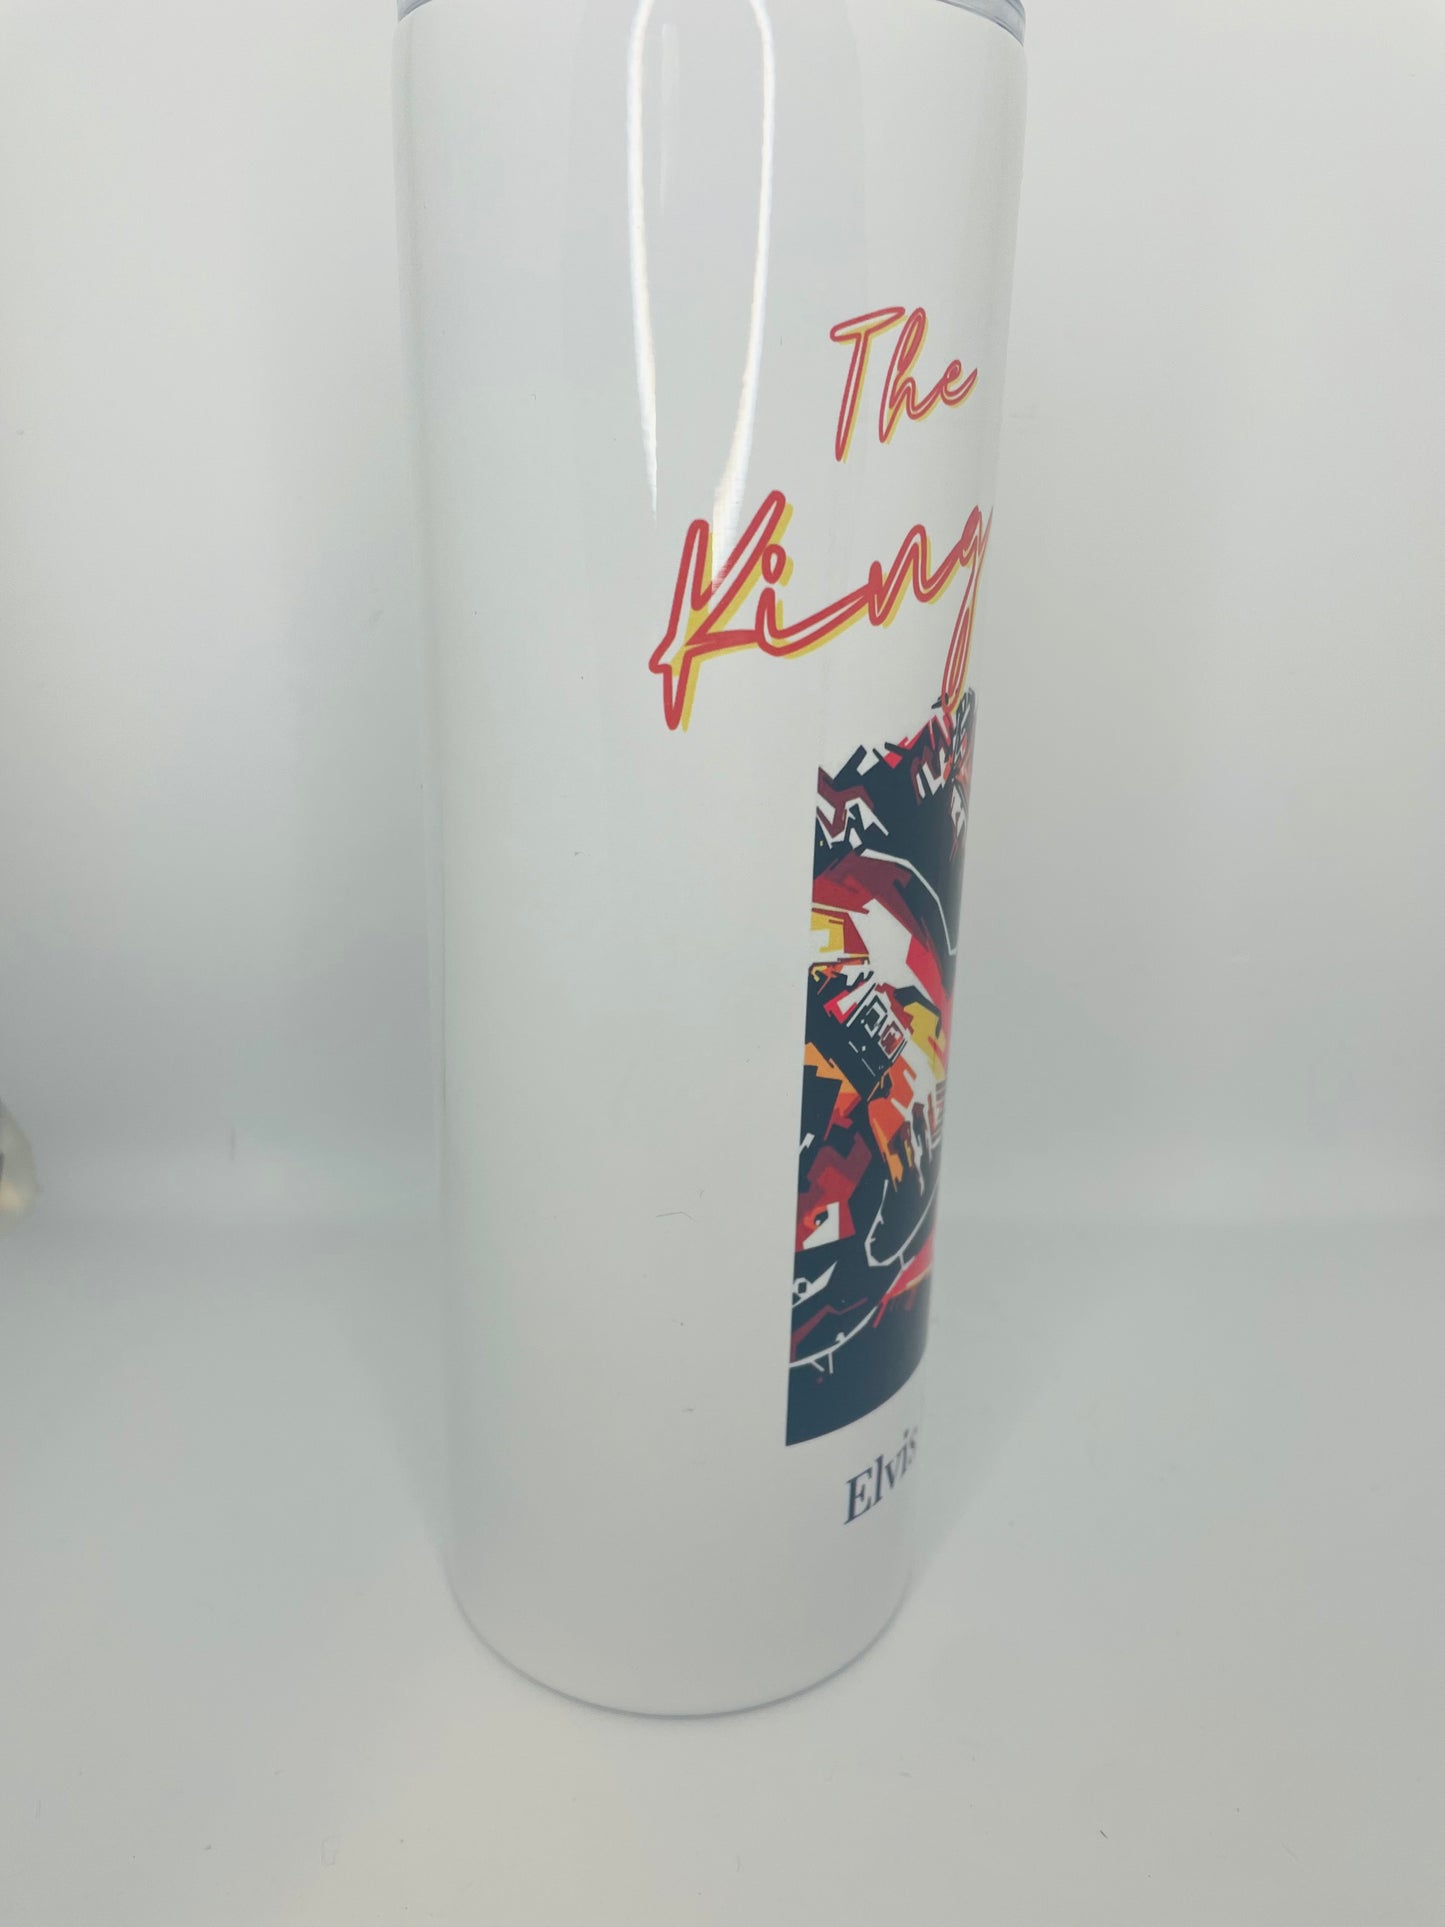 Customized Tumblers, Personalized Tumblers, Personalized Cups, Elvis, Elvis Presley, Elvis Customized Tumblers, Elvis Presley Customized Tumblers, Elvis Cup, Elvis Presley Cup, Coffee Cups, Tumblers, Unique Gifts, Personalized Gifts